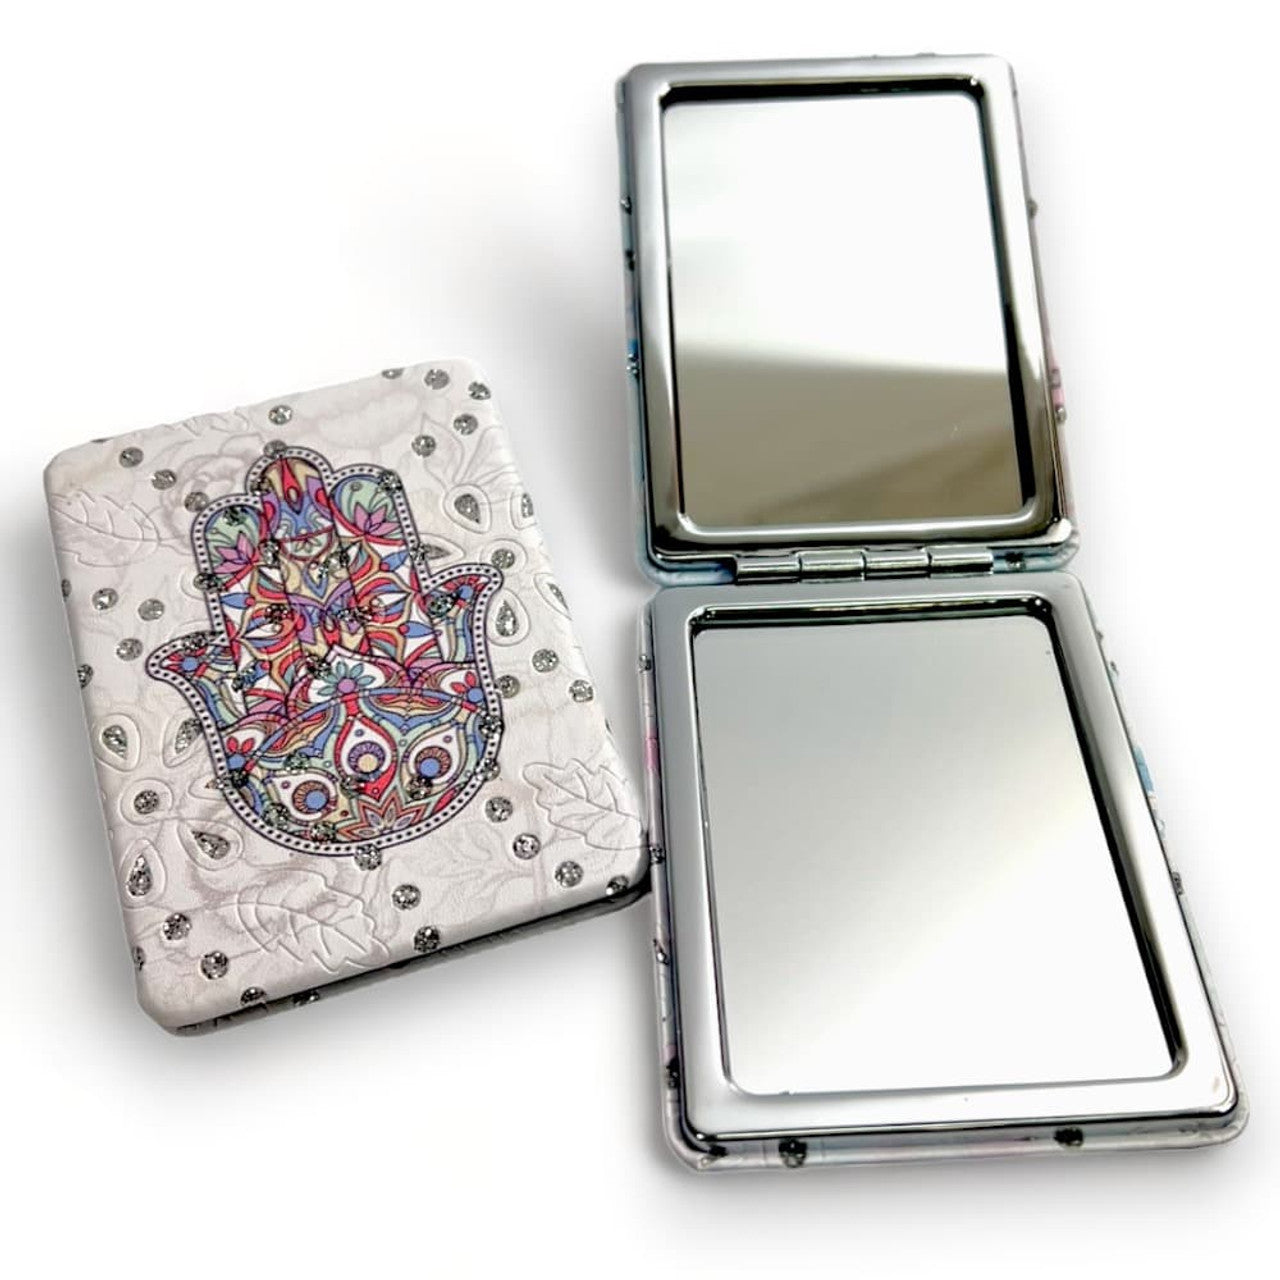 Hamsa with Rhinestones Square Makeup Pocket Mirror - Best Beauty Gifts For Friends, 1 Count Random Pick